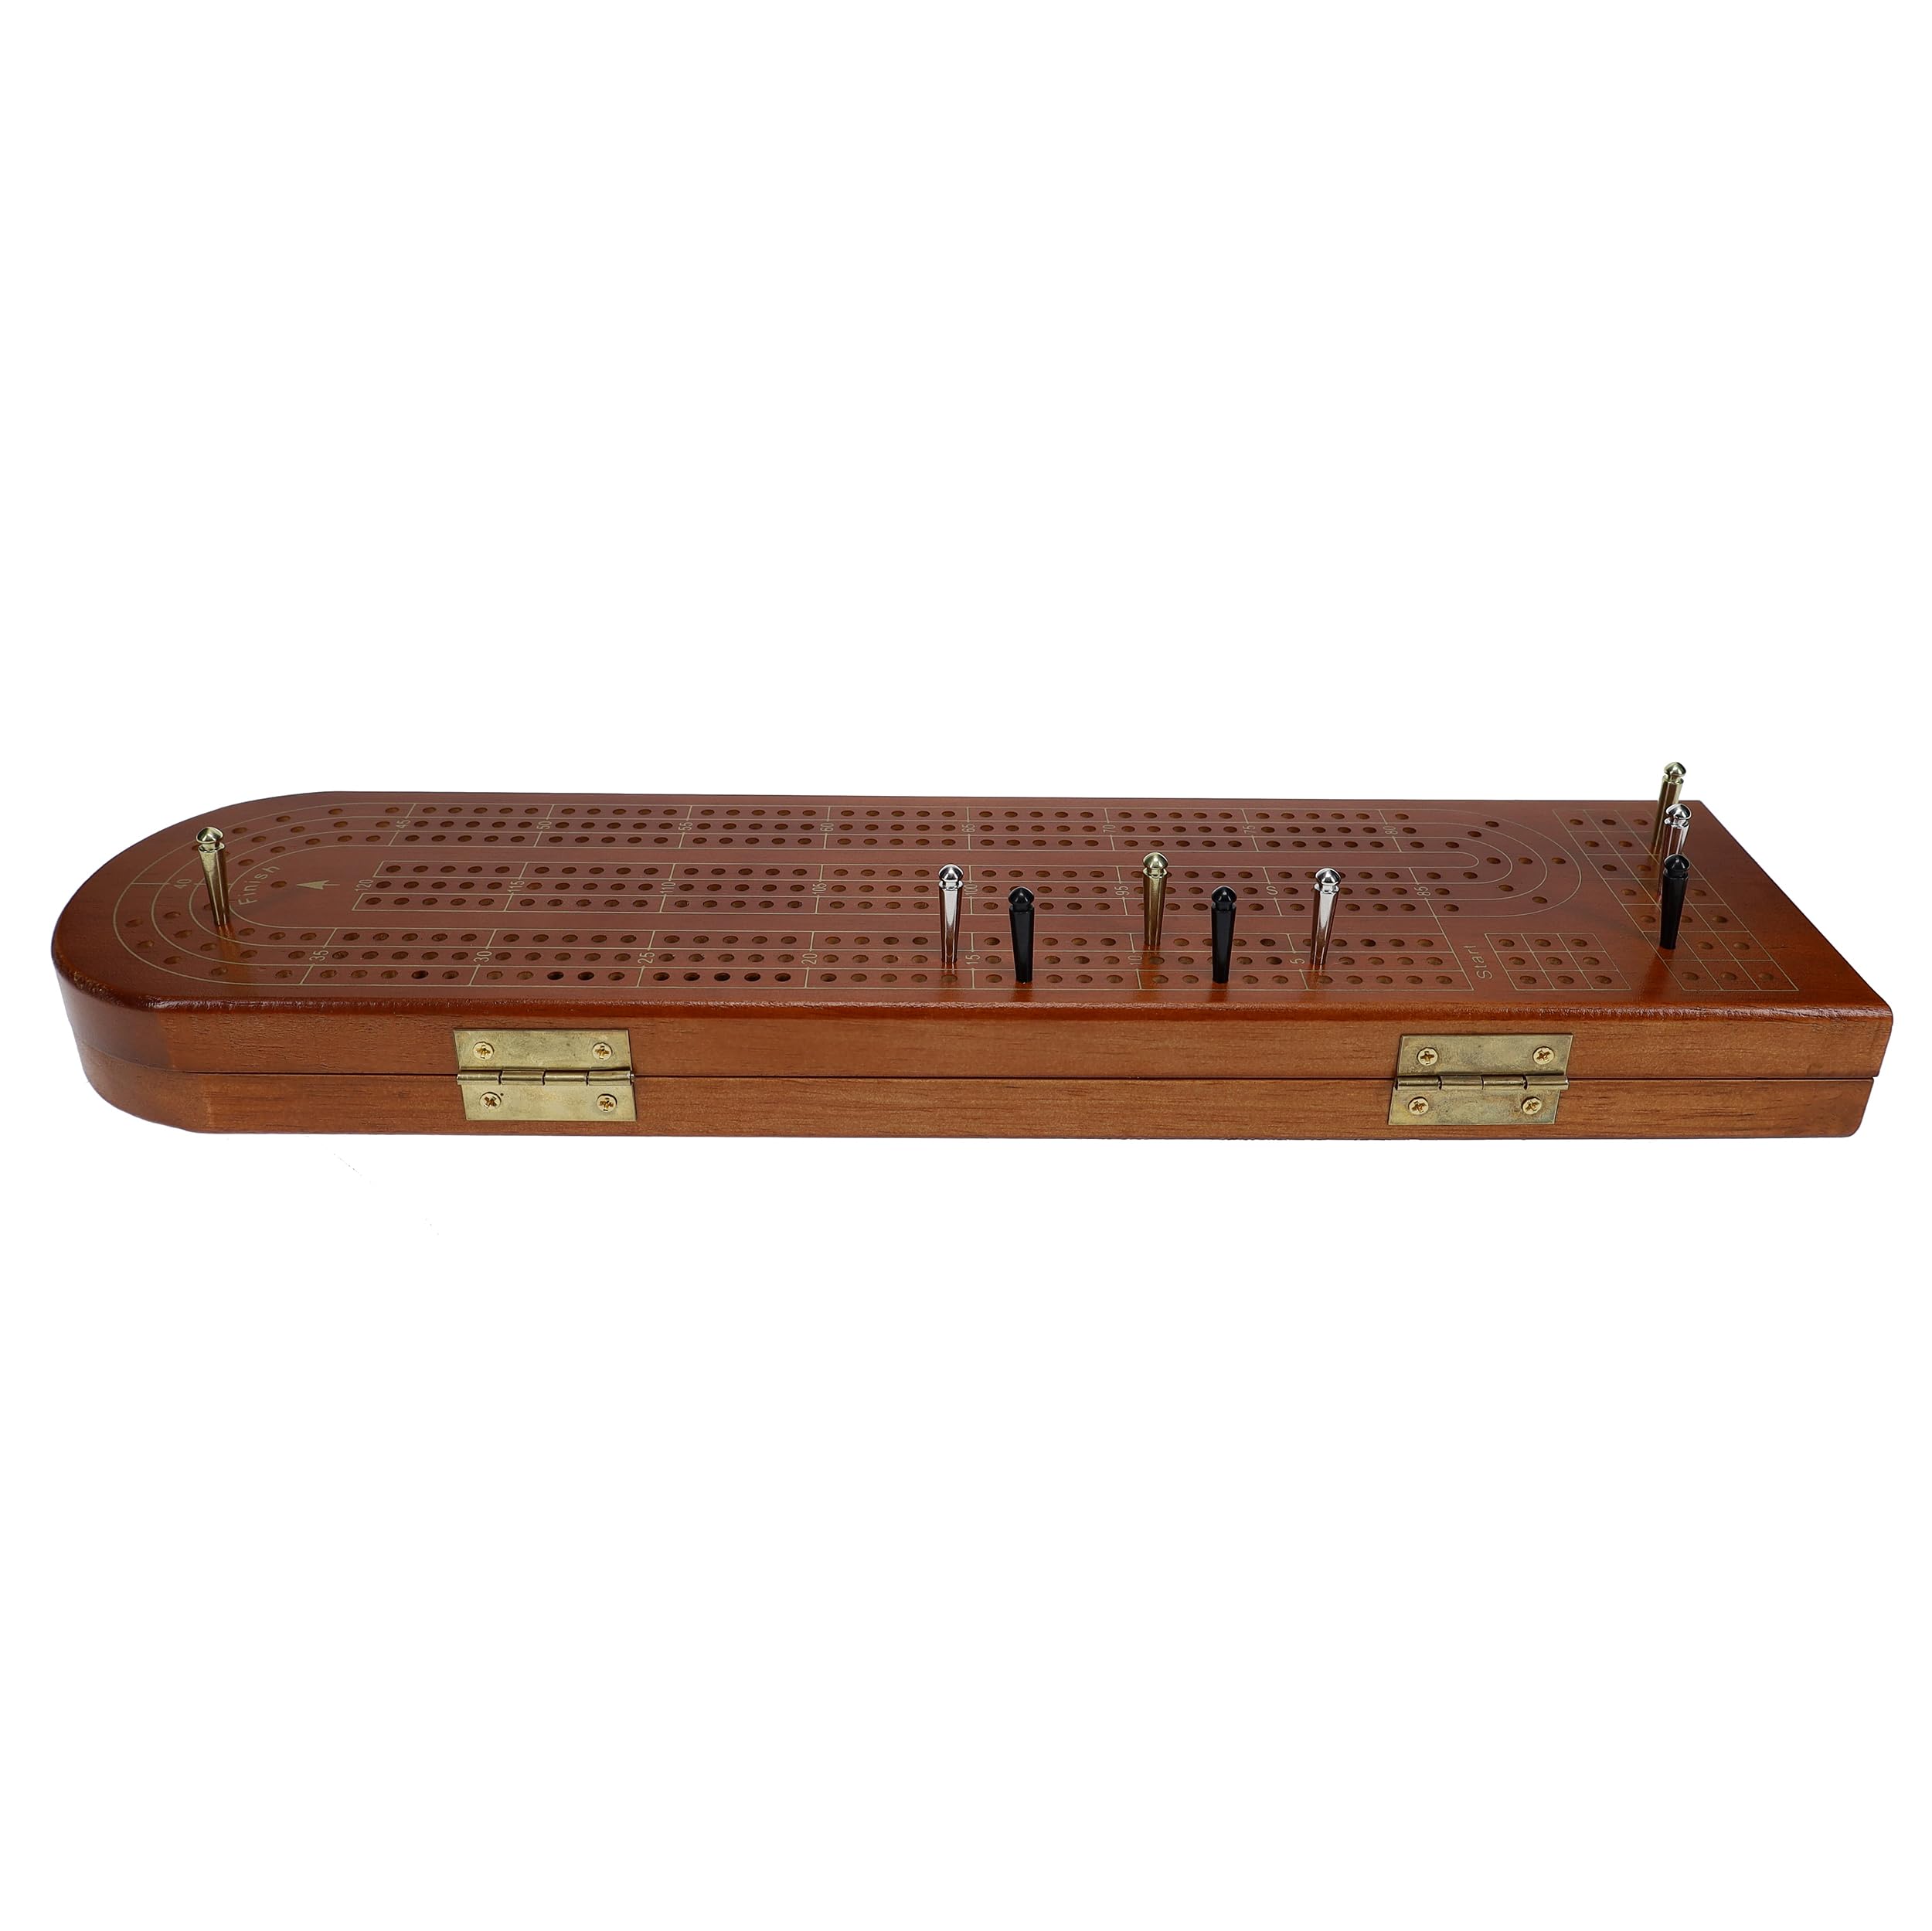 Pacific Shore Games Wooden Cribbage Board Game Set, Walnut Stained Continuous 3 Track for 2-3 Players, Card Storage